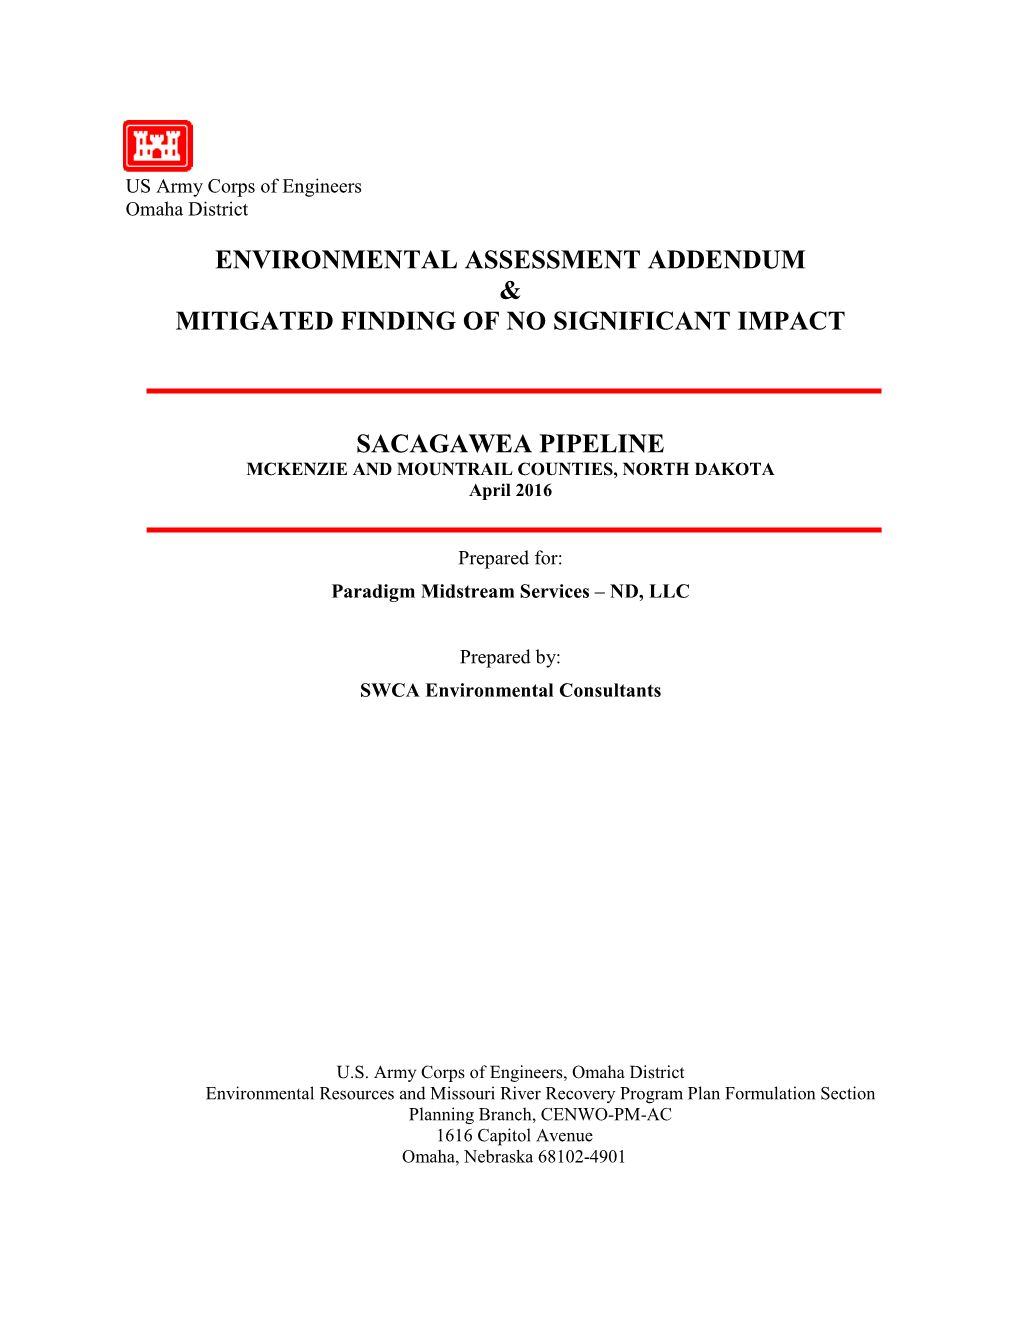 Environmental Assessment Addendum & Mitigated Finding of No Significant